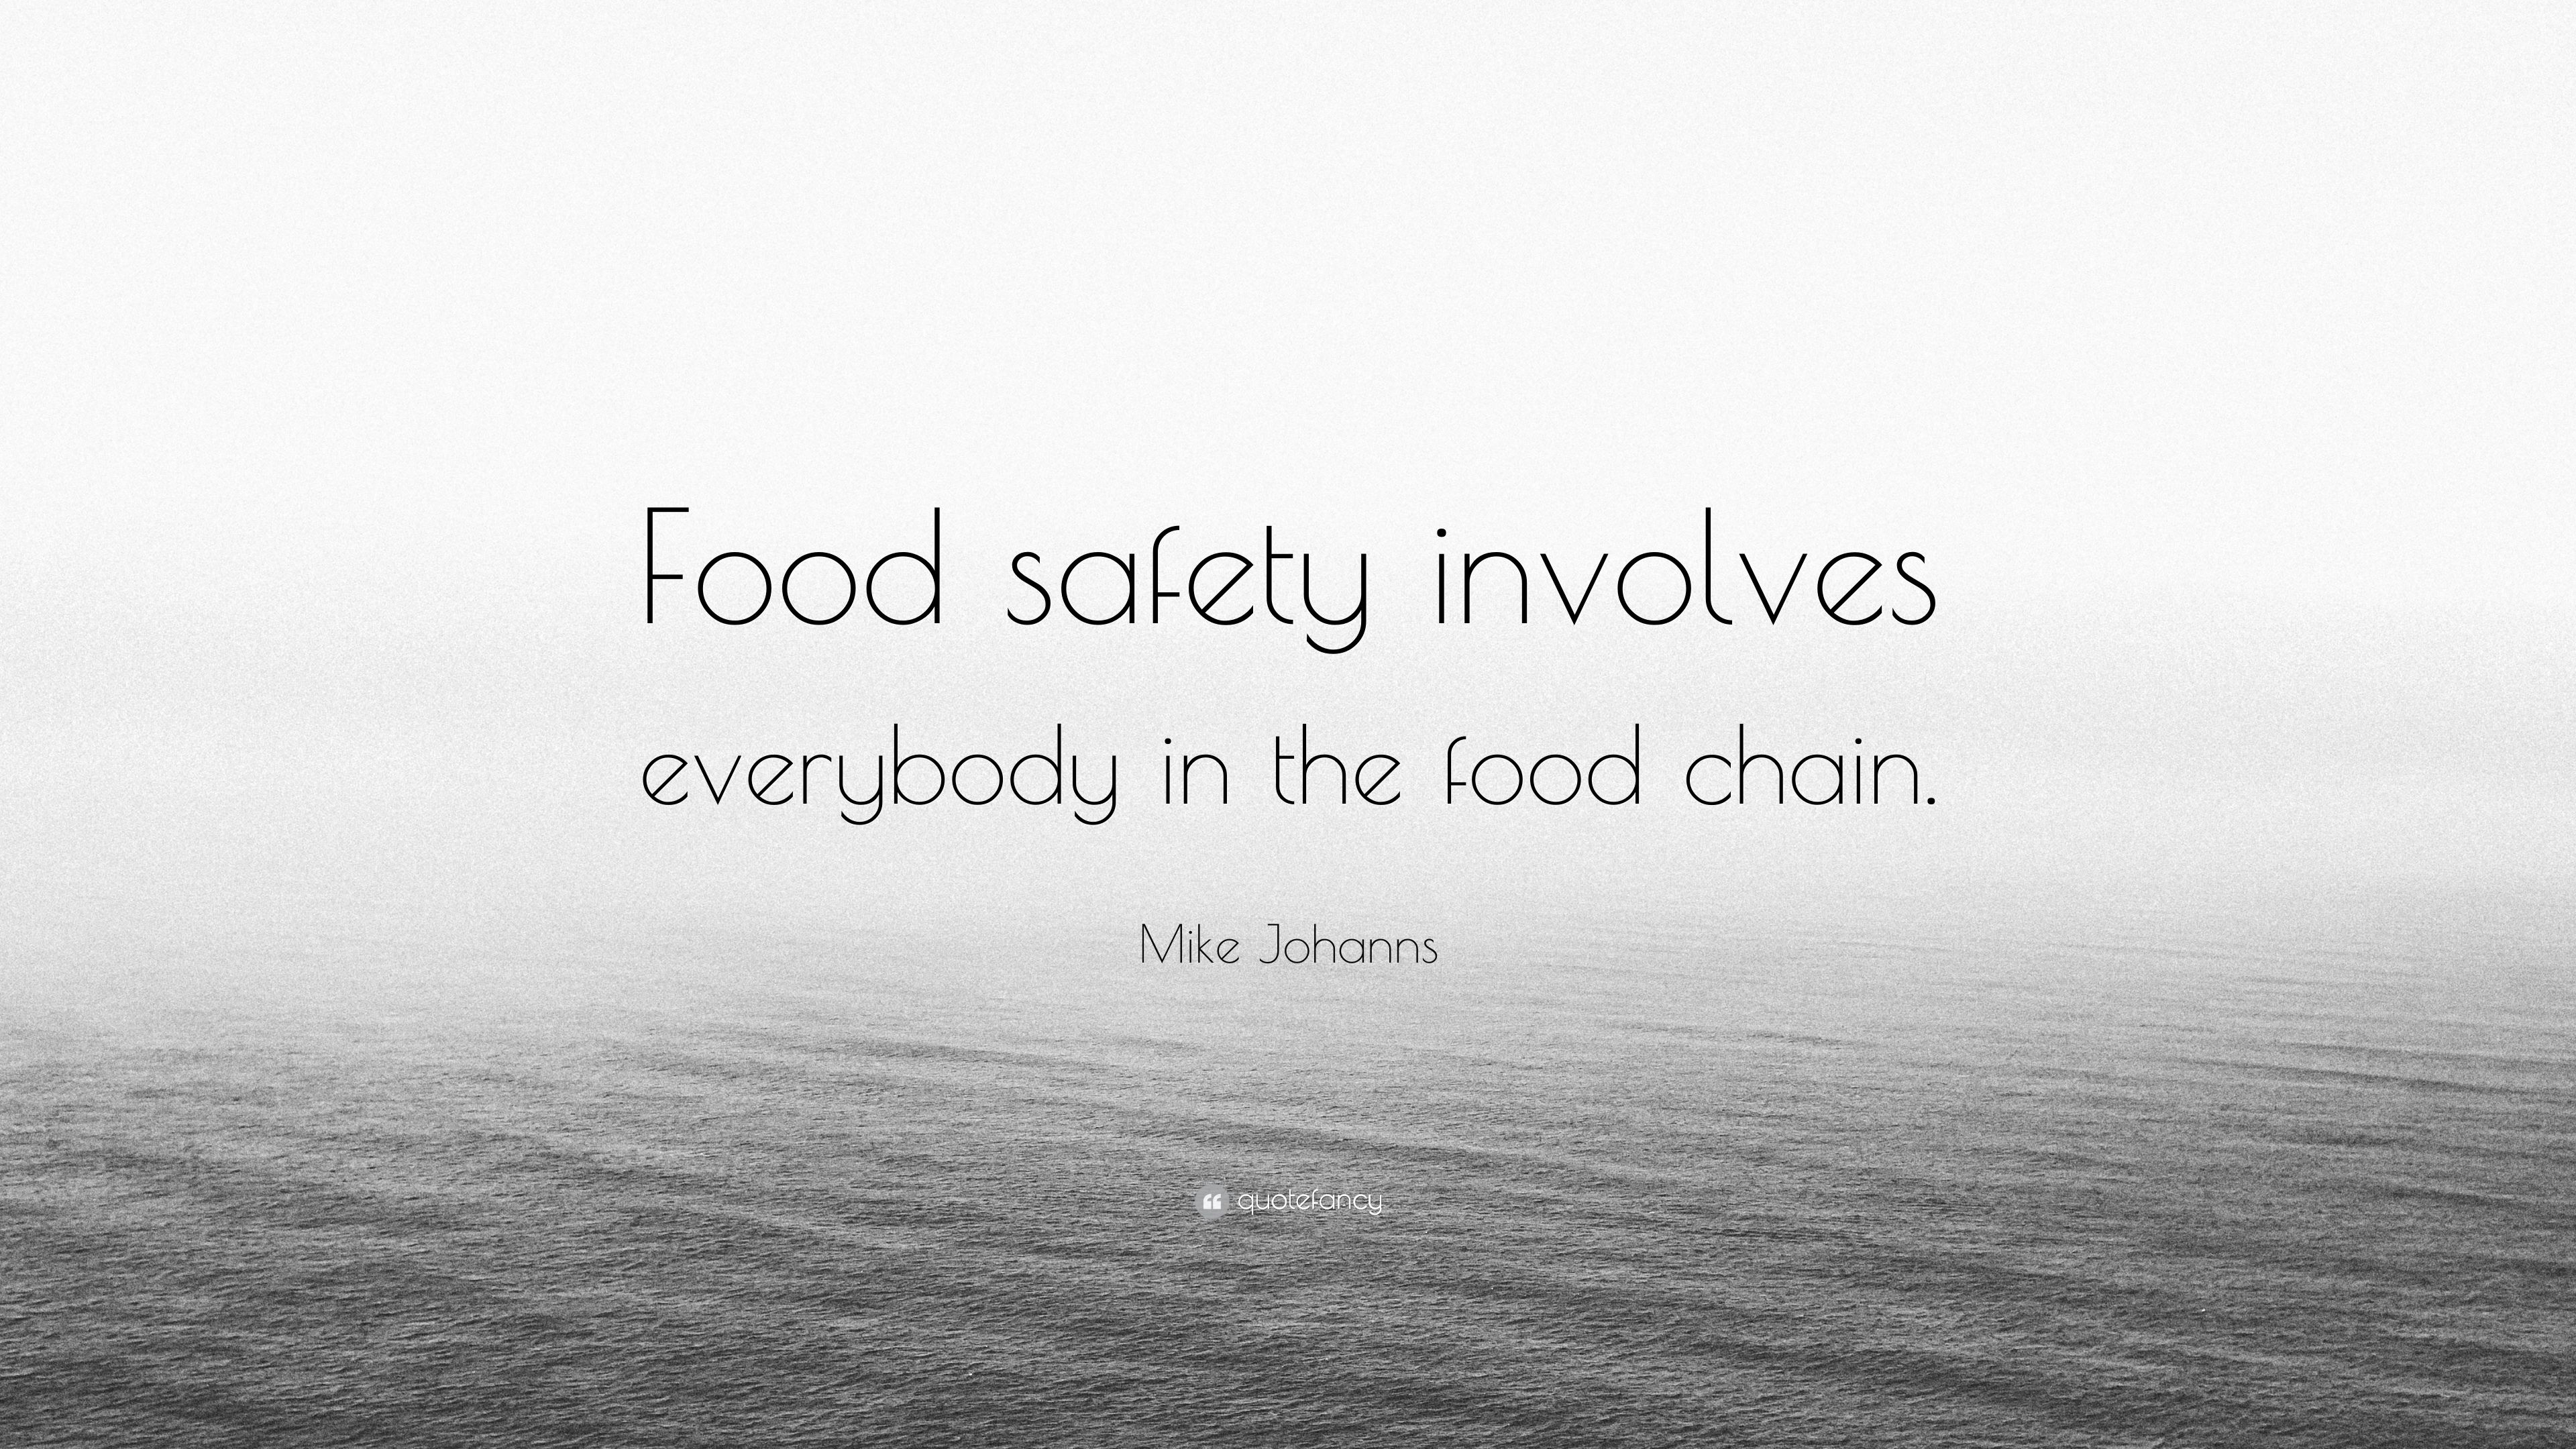 Mike Johanns Quote: “Food safety involves everybody in the food chain.” (7 wallpaper)